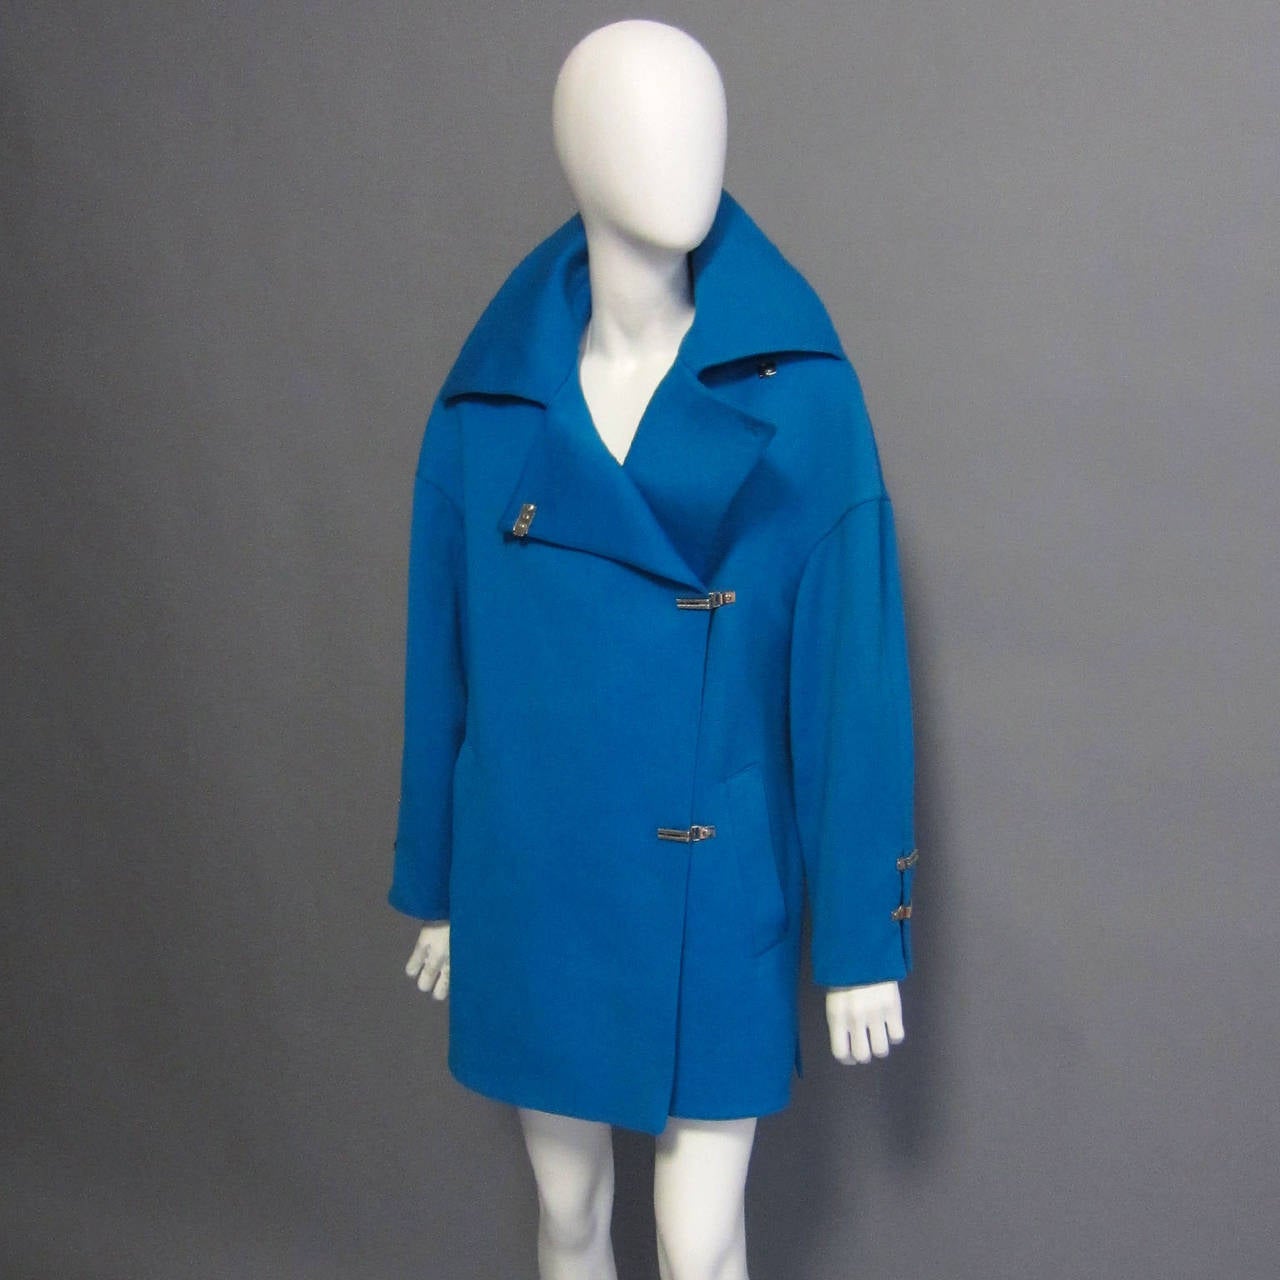 This MONTANA coat is made of a bright, teal wool. The bold color is striking, but also highlights the design details of this beautiful coat. The asymmetrical closure is secured by a series of silver, metal toggles. This hardware is repeated on the